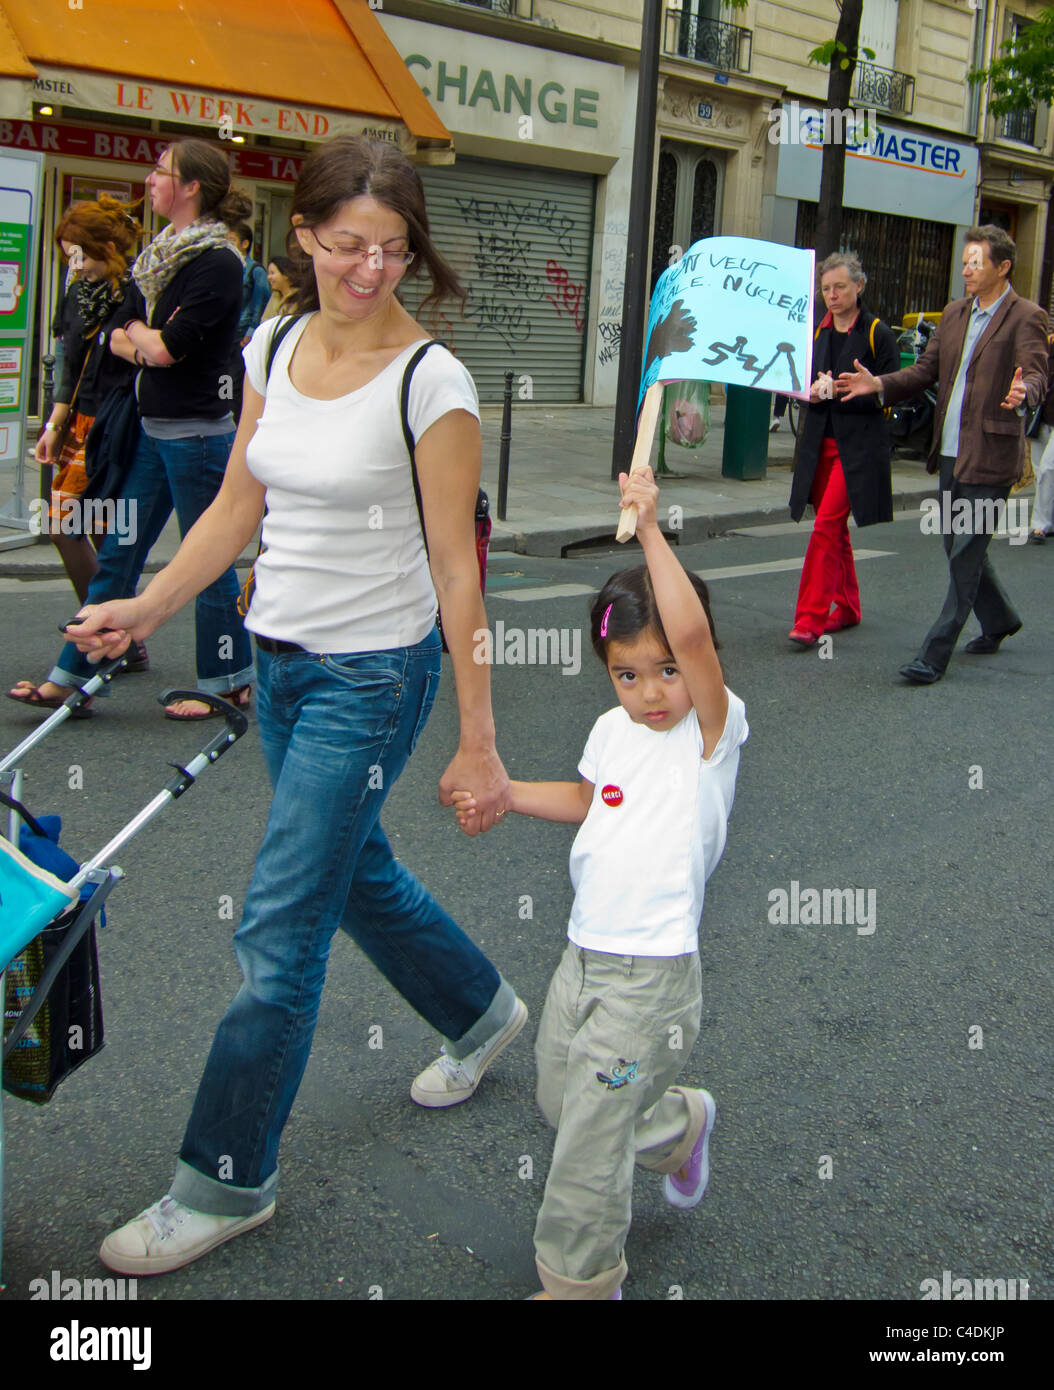 Paris, France, French Demonstration Against Nuclear Power, Families Women Marching with Children Stock Photo